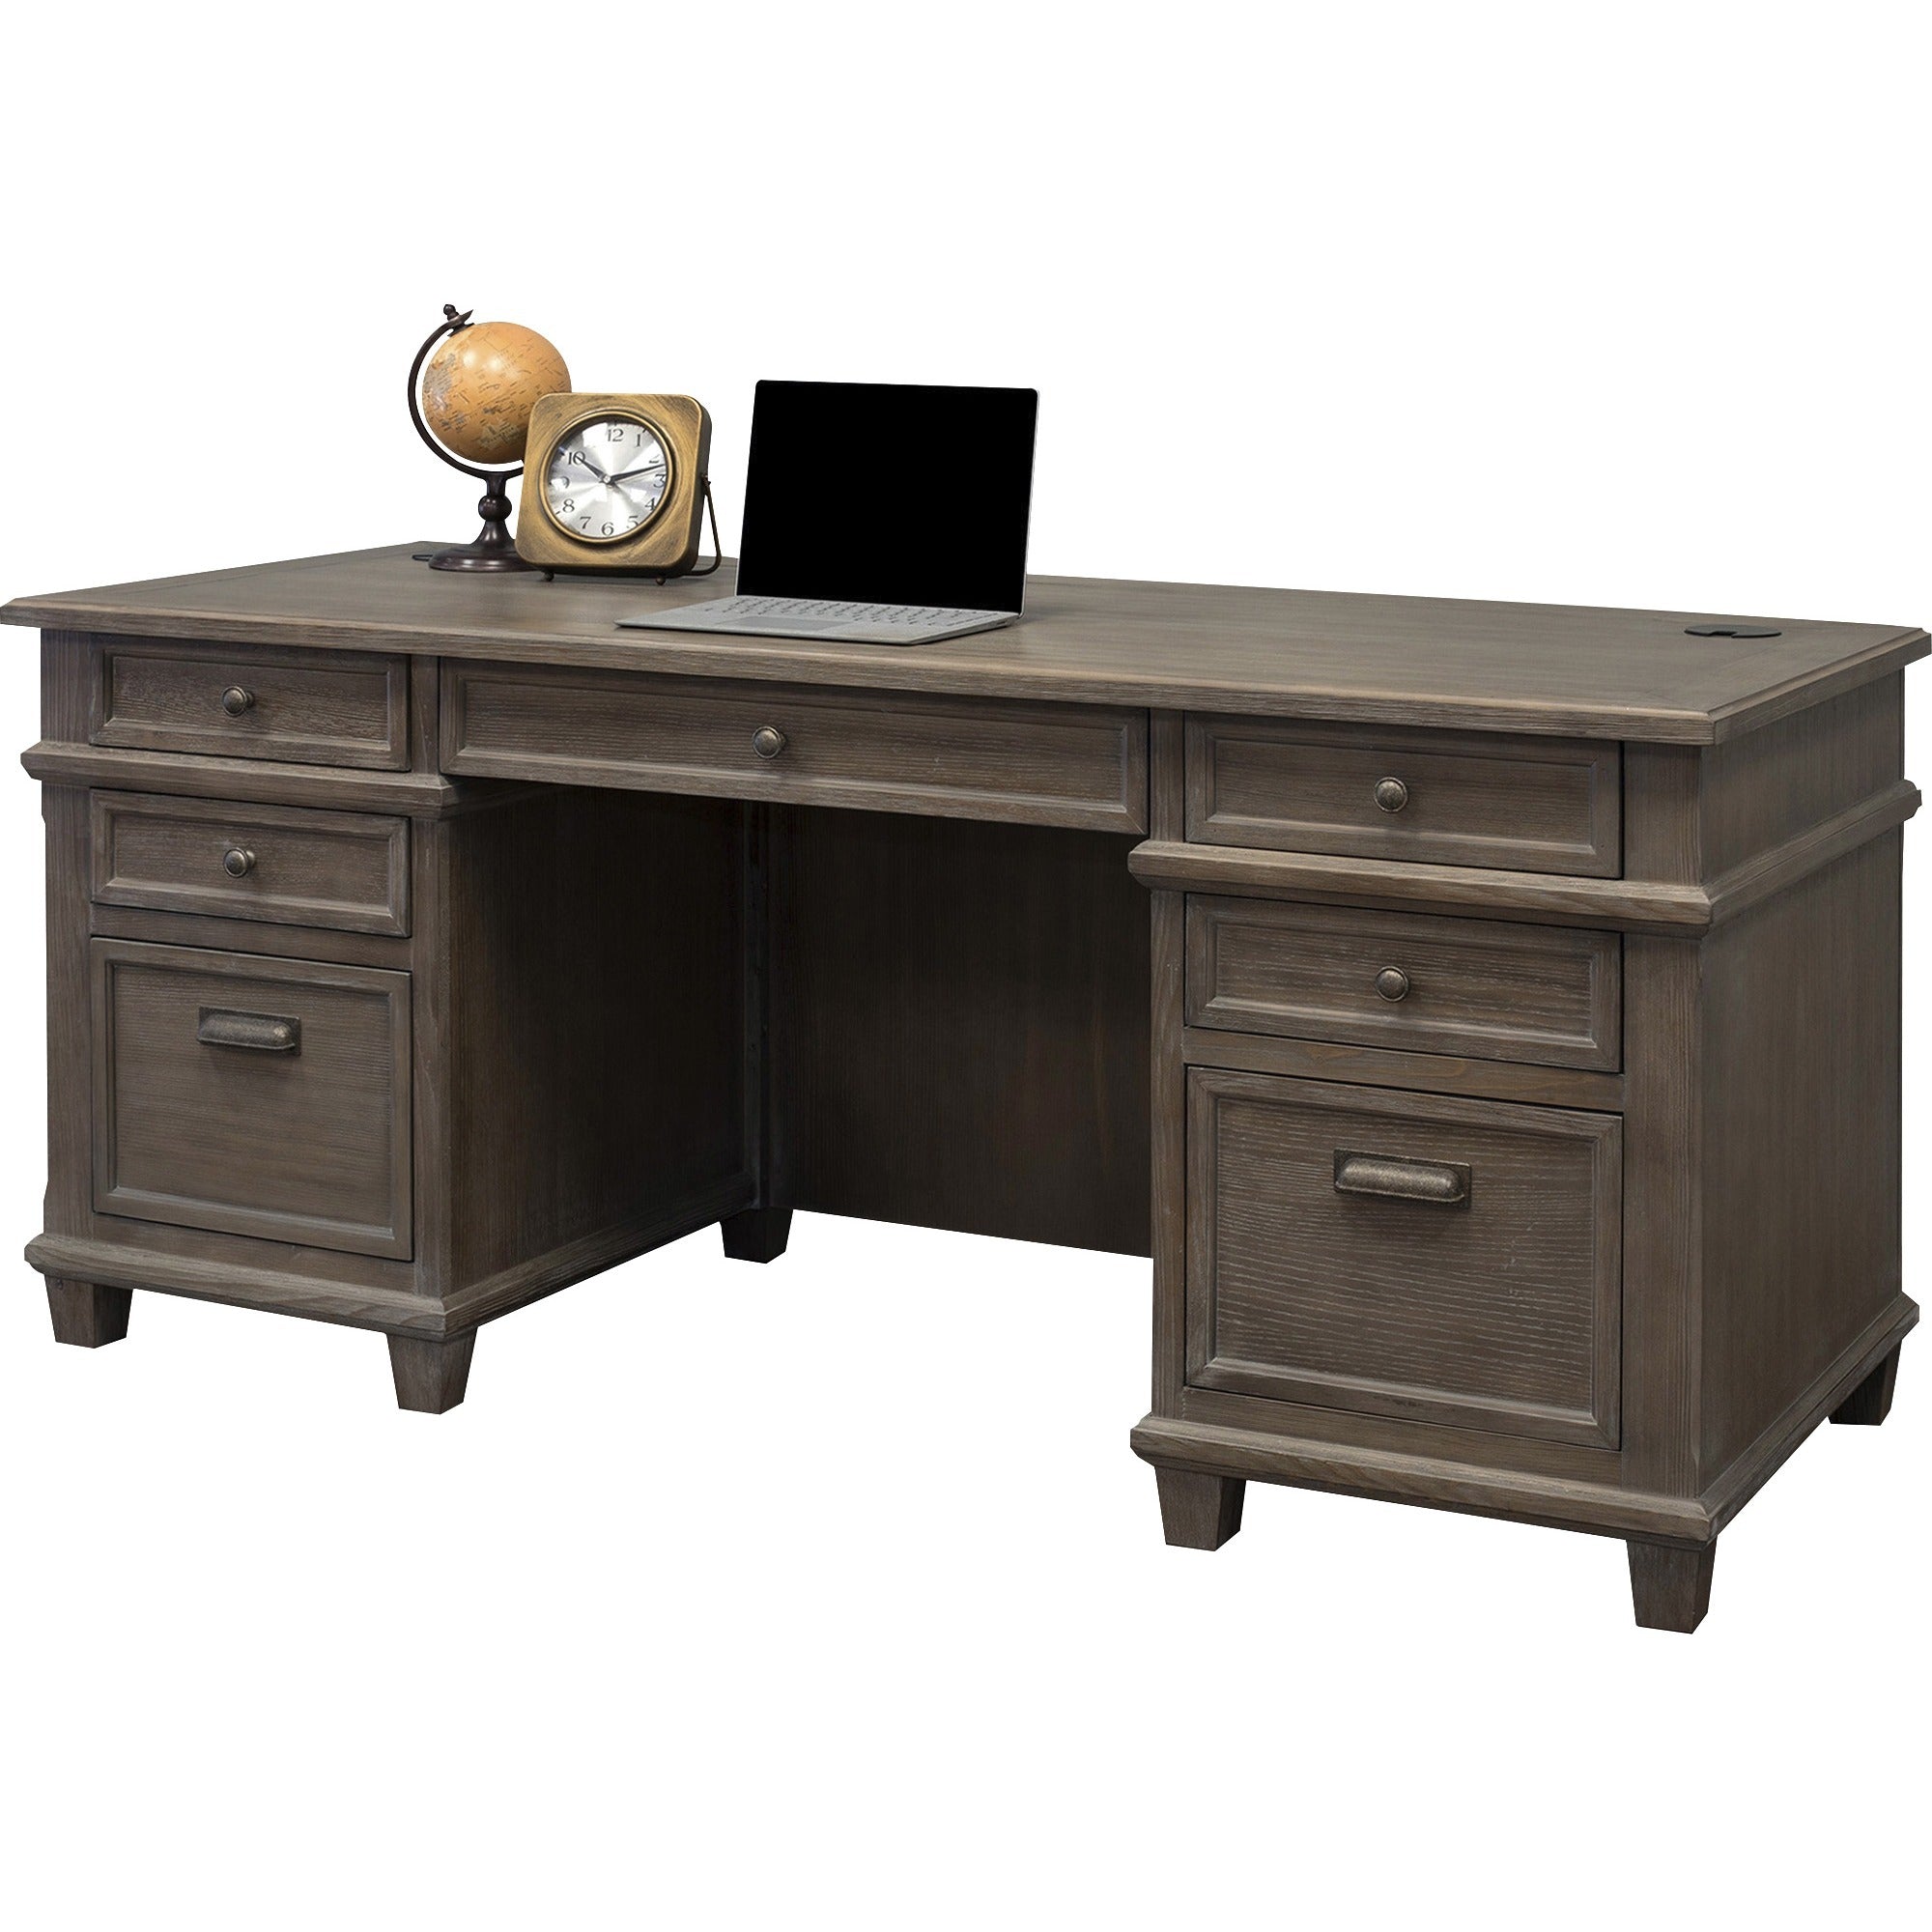 martin-carson-double-pedestal-desk-7-drawer-7-x-storage-utility-file-drawers-double-pedestal-material-veneer-solid-lumber-finish-weathered-dove_mrtimca680 - 3